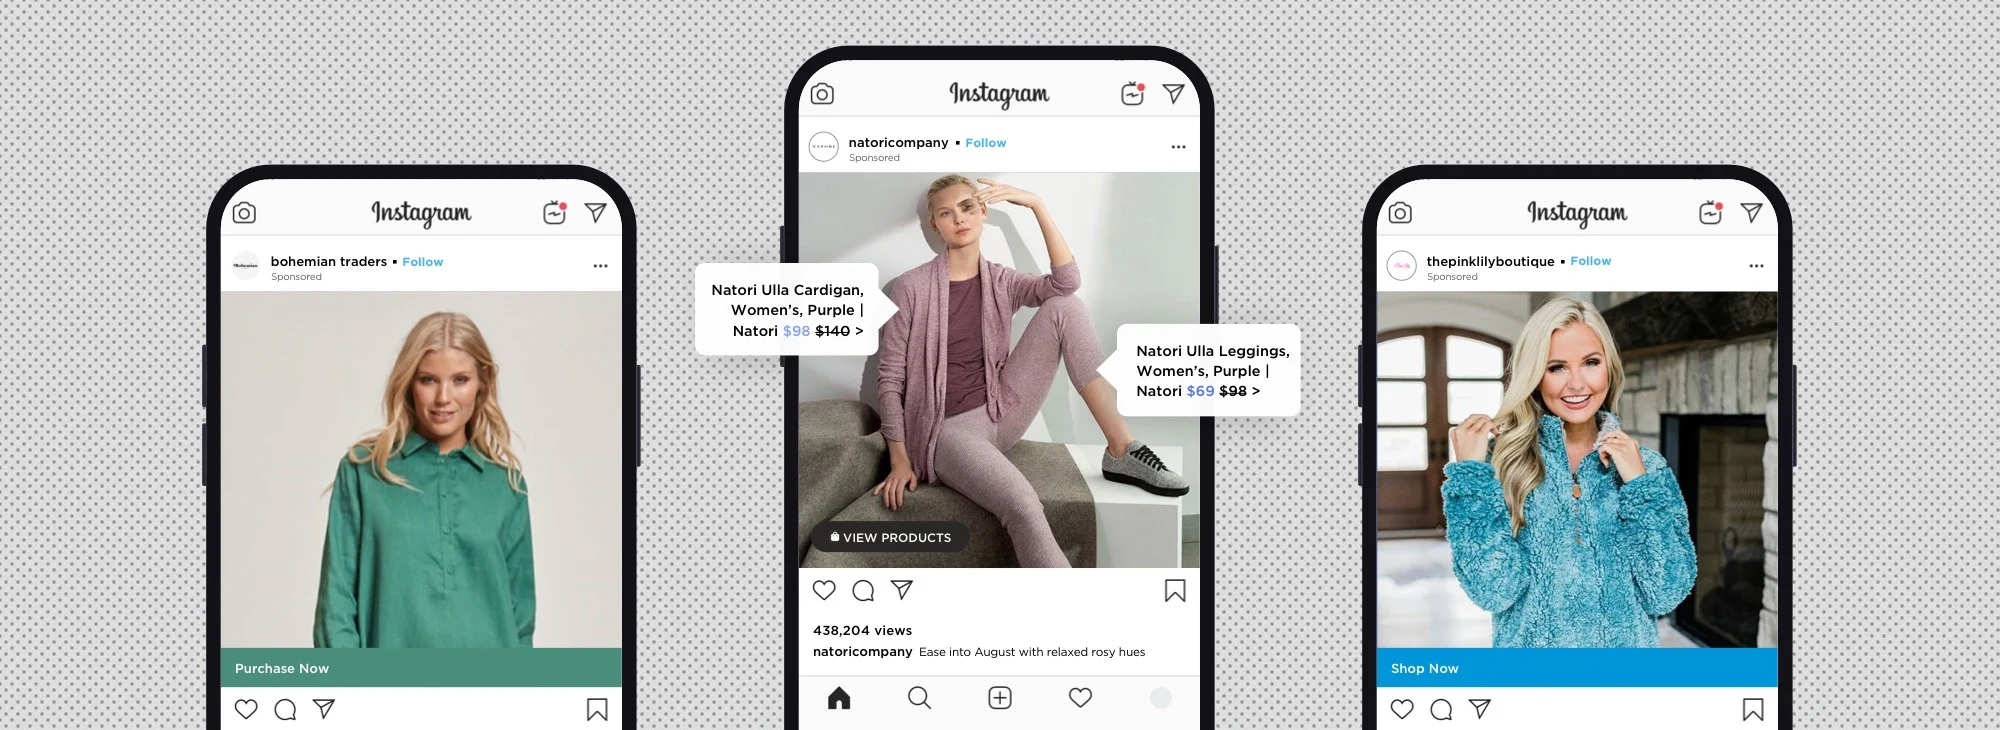 https://cms-wp.bigcommerce.com/wp-content/uploads/2019/11/2019-August-Content-Blog-Headers_Batch-2-2-How-To-Advertise-On-Instagram-34CD-MT-@1x-1.jpg